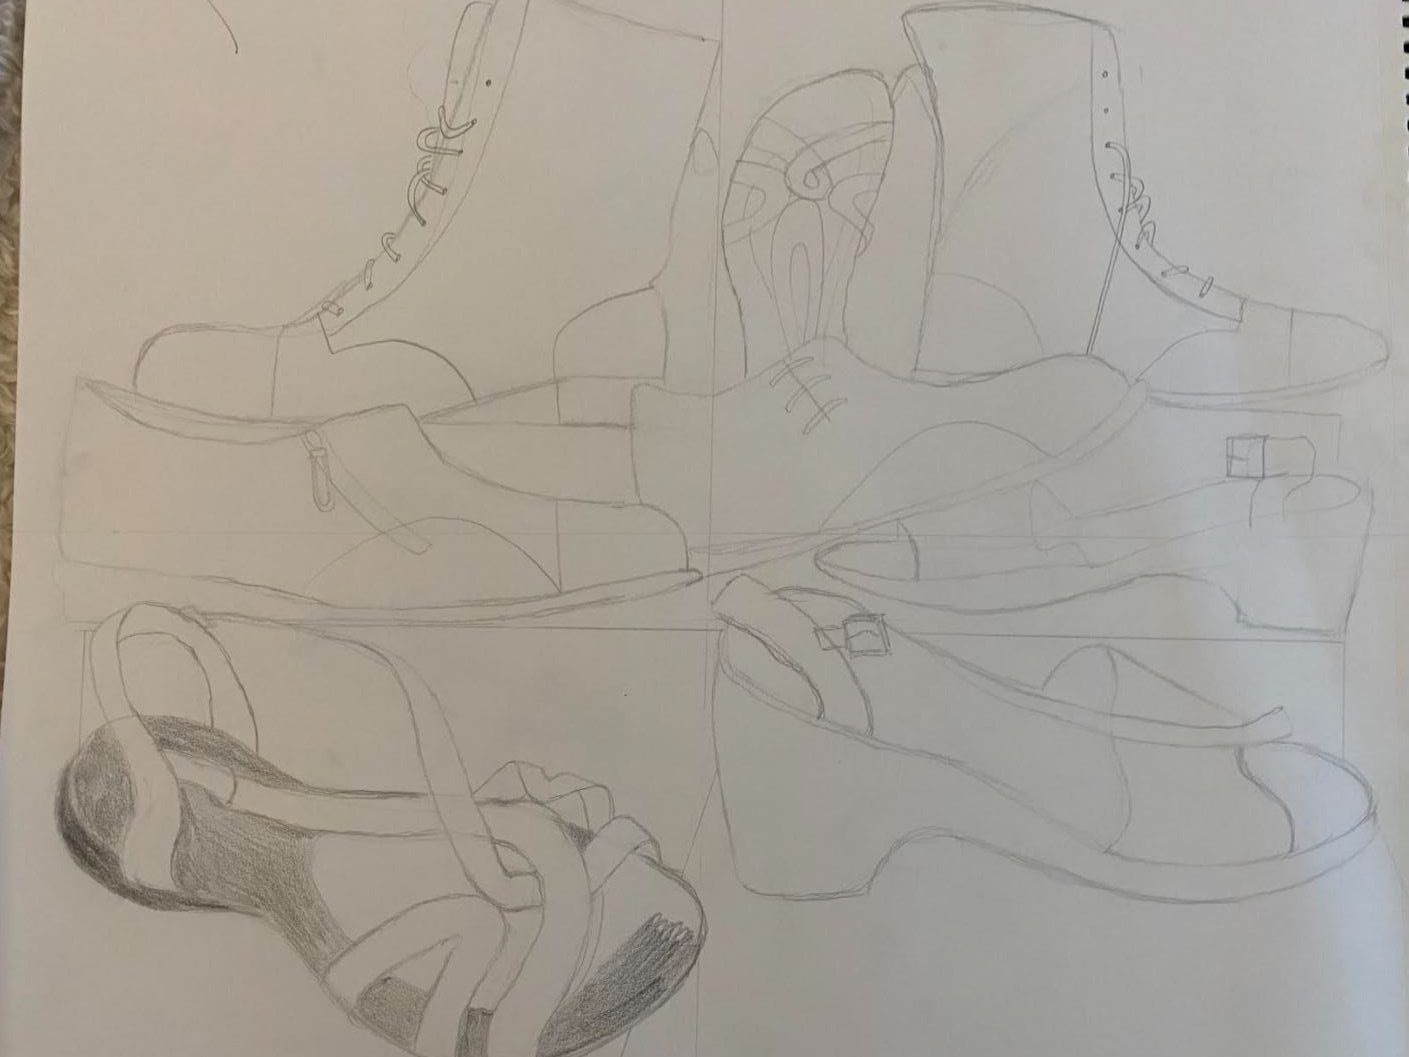 March 30, April 1 – In Class Shoe Still Life & Shoes in a Non-Traditional Format